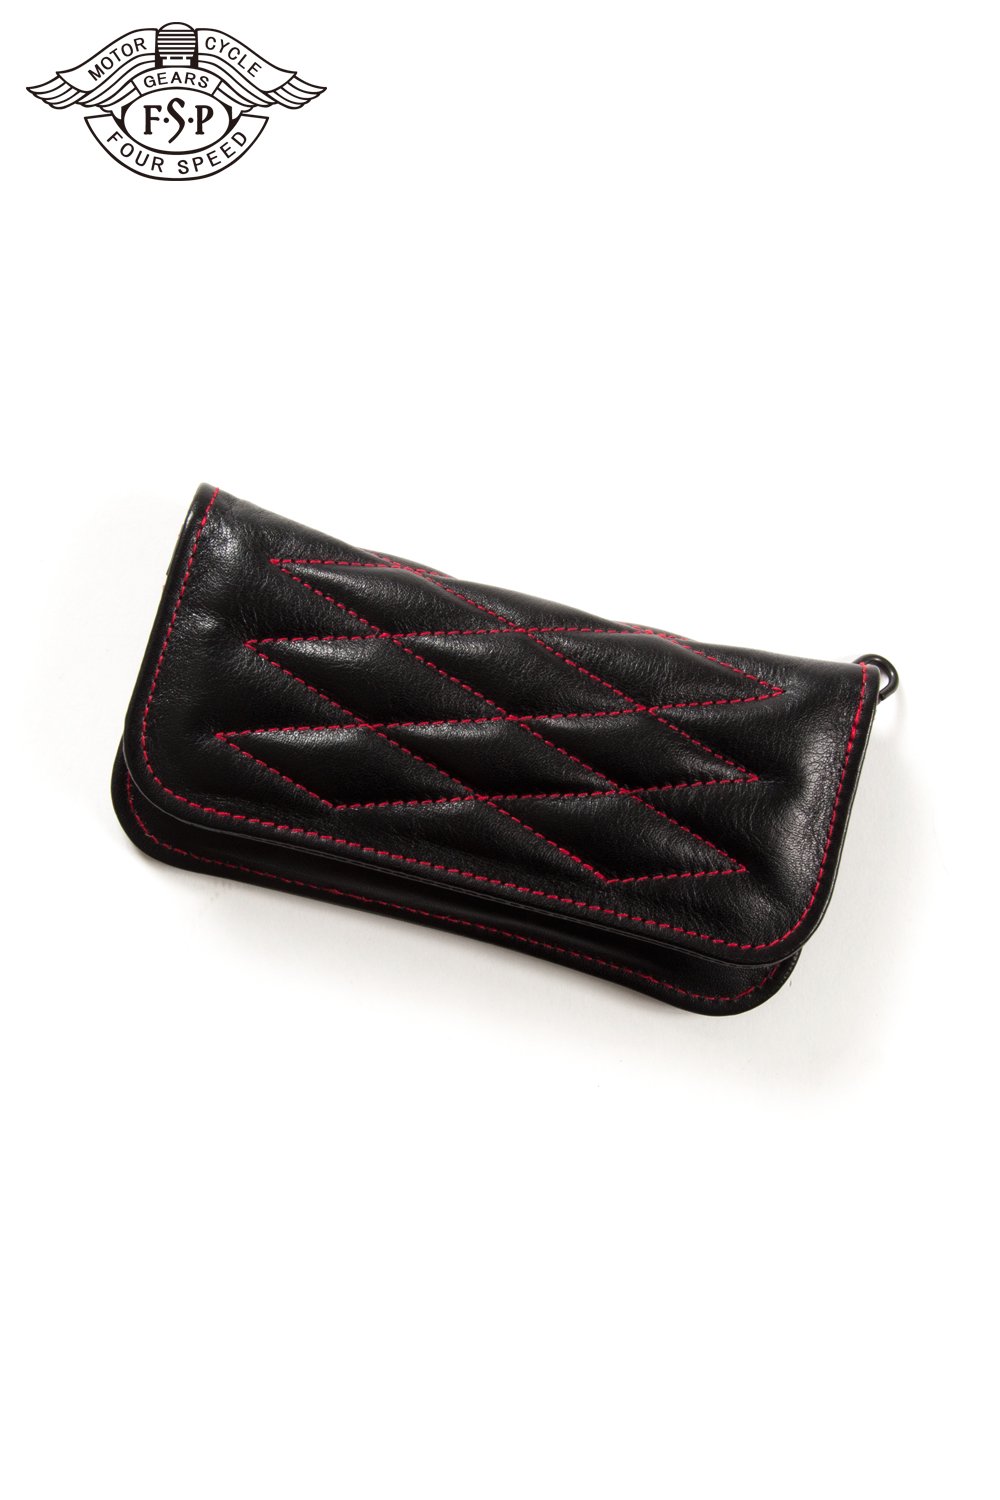 FourSpeed(フォースピード) 長財布 LONG WALLET -BLACK- 通販正規取扱 